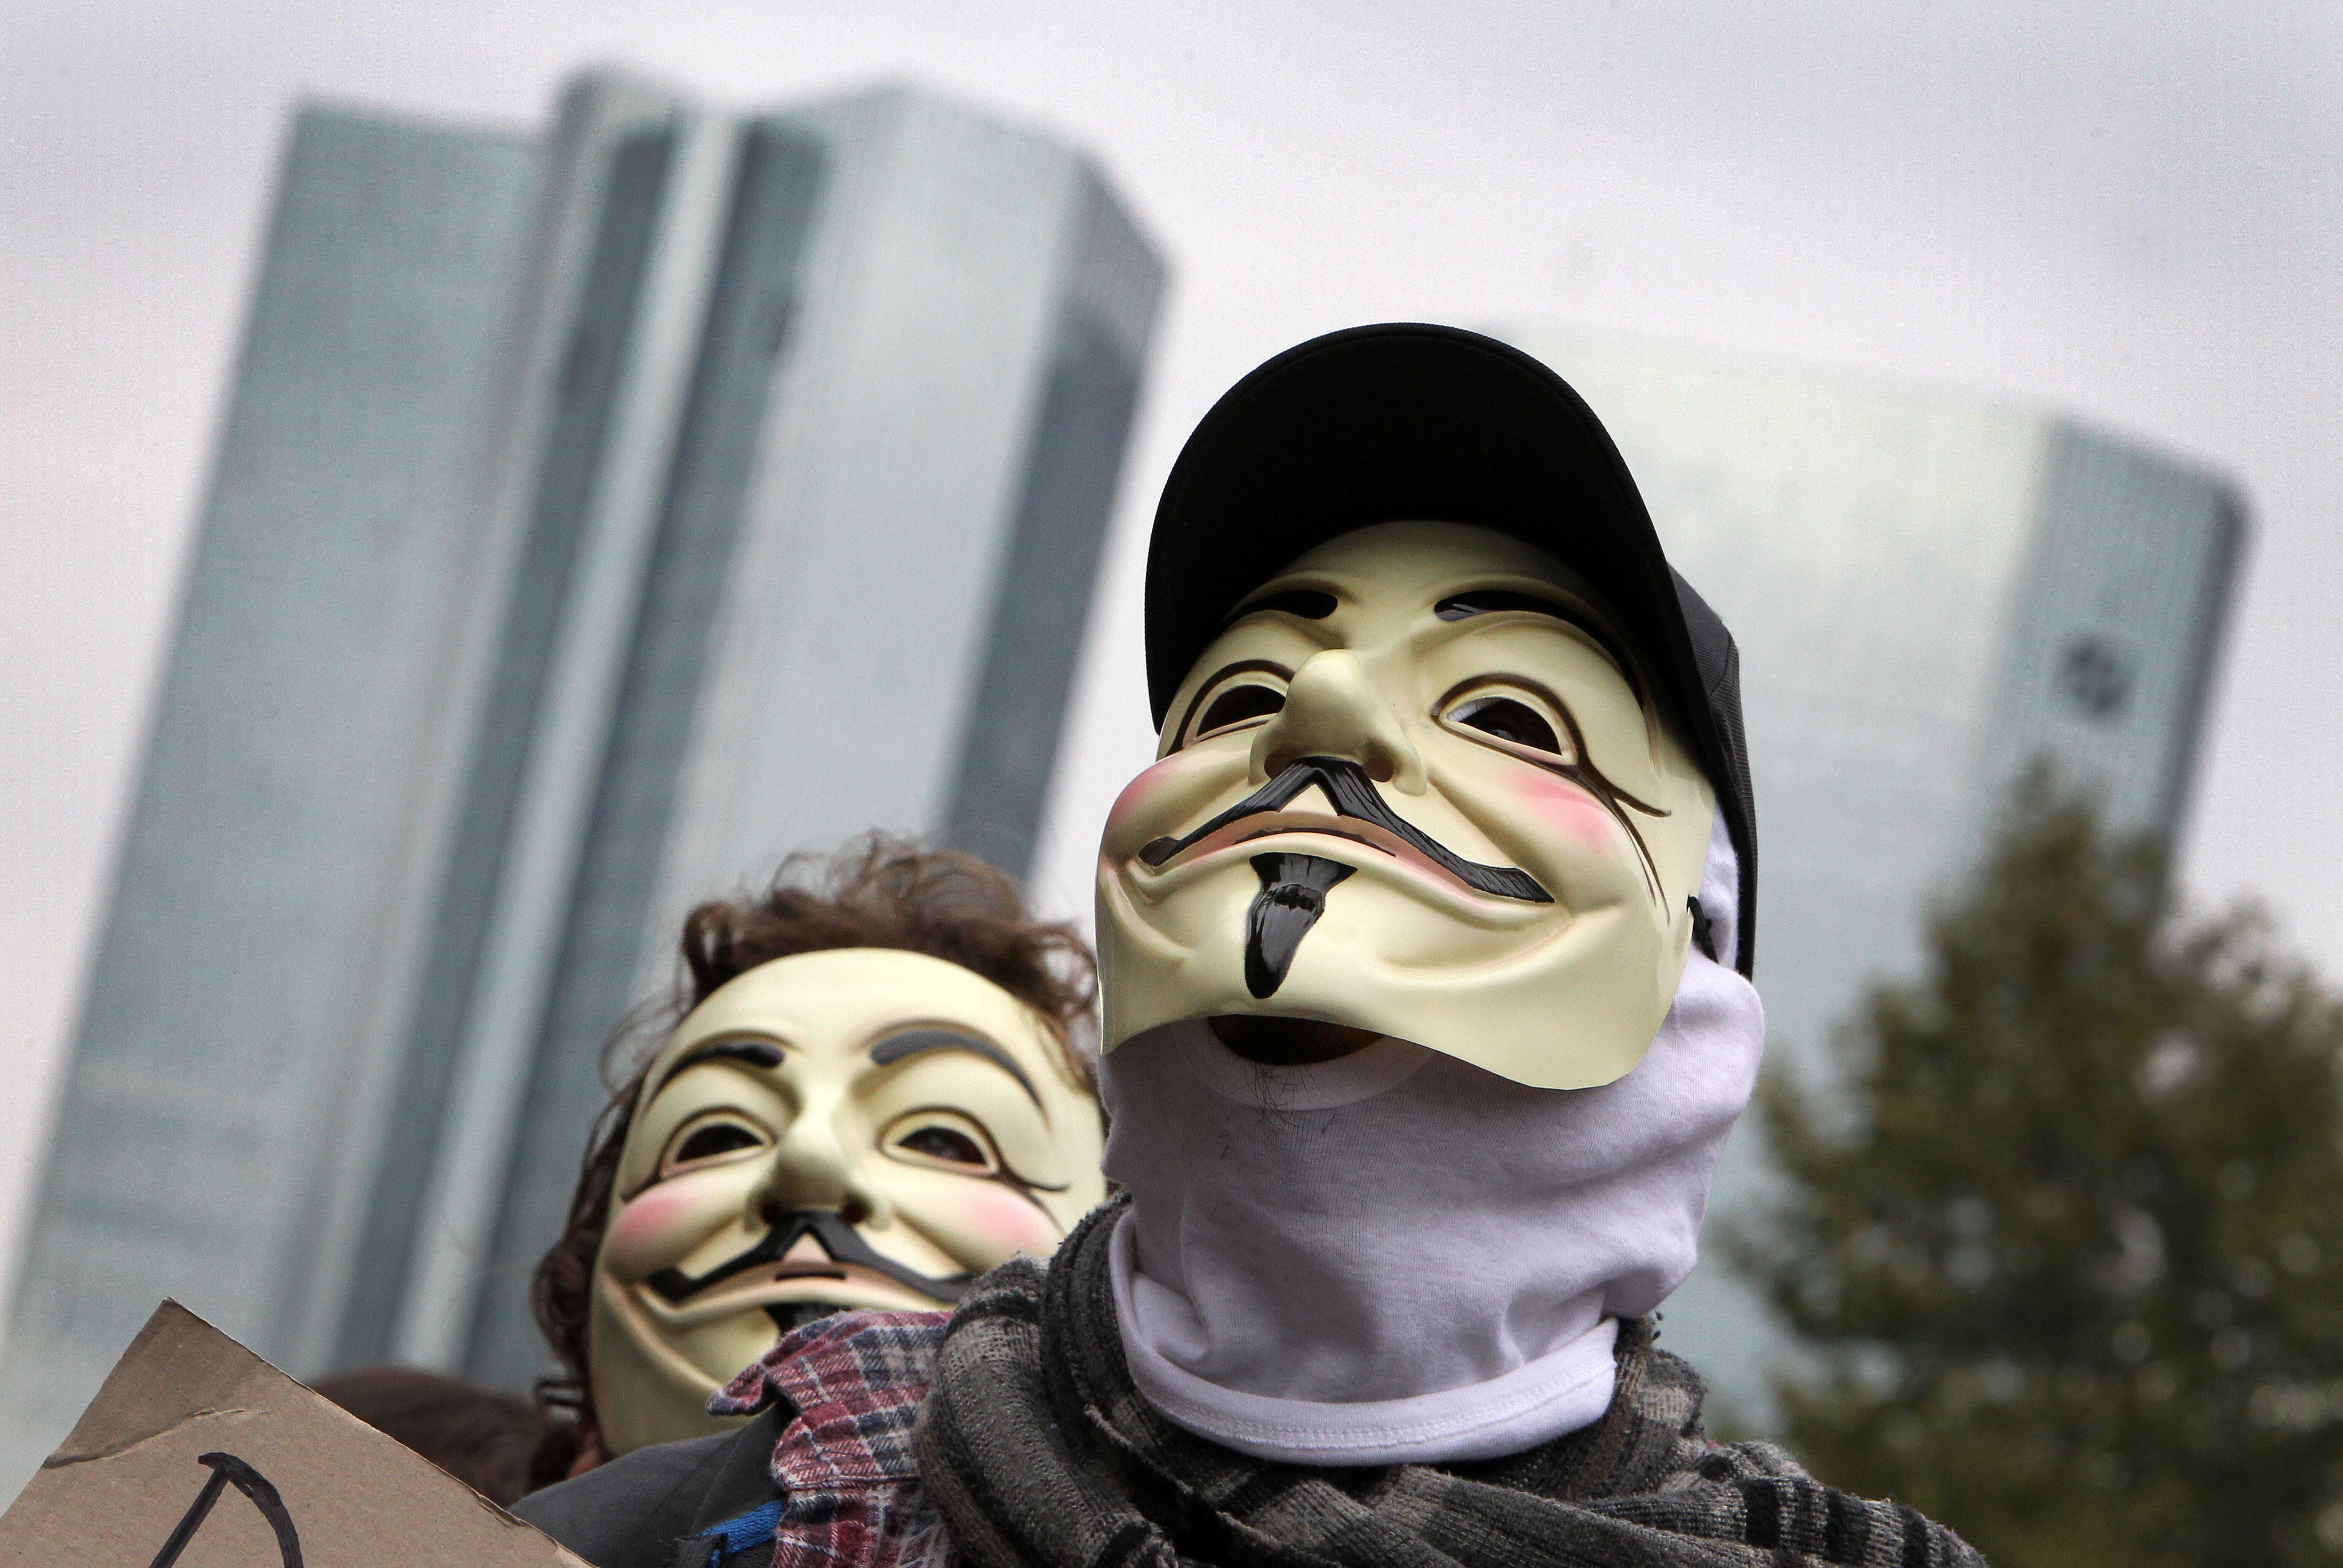 Is It Illegal to Wear Anonymous Guy Fawkes Mask in Public or Protest?